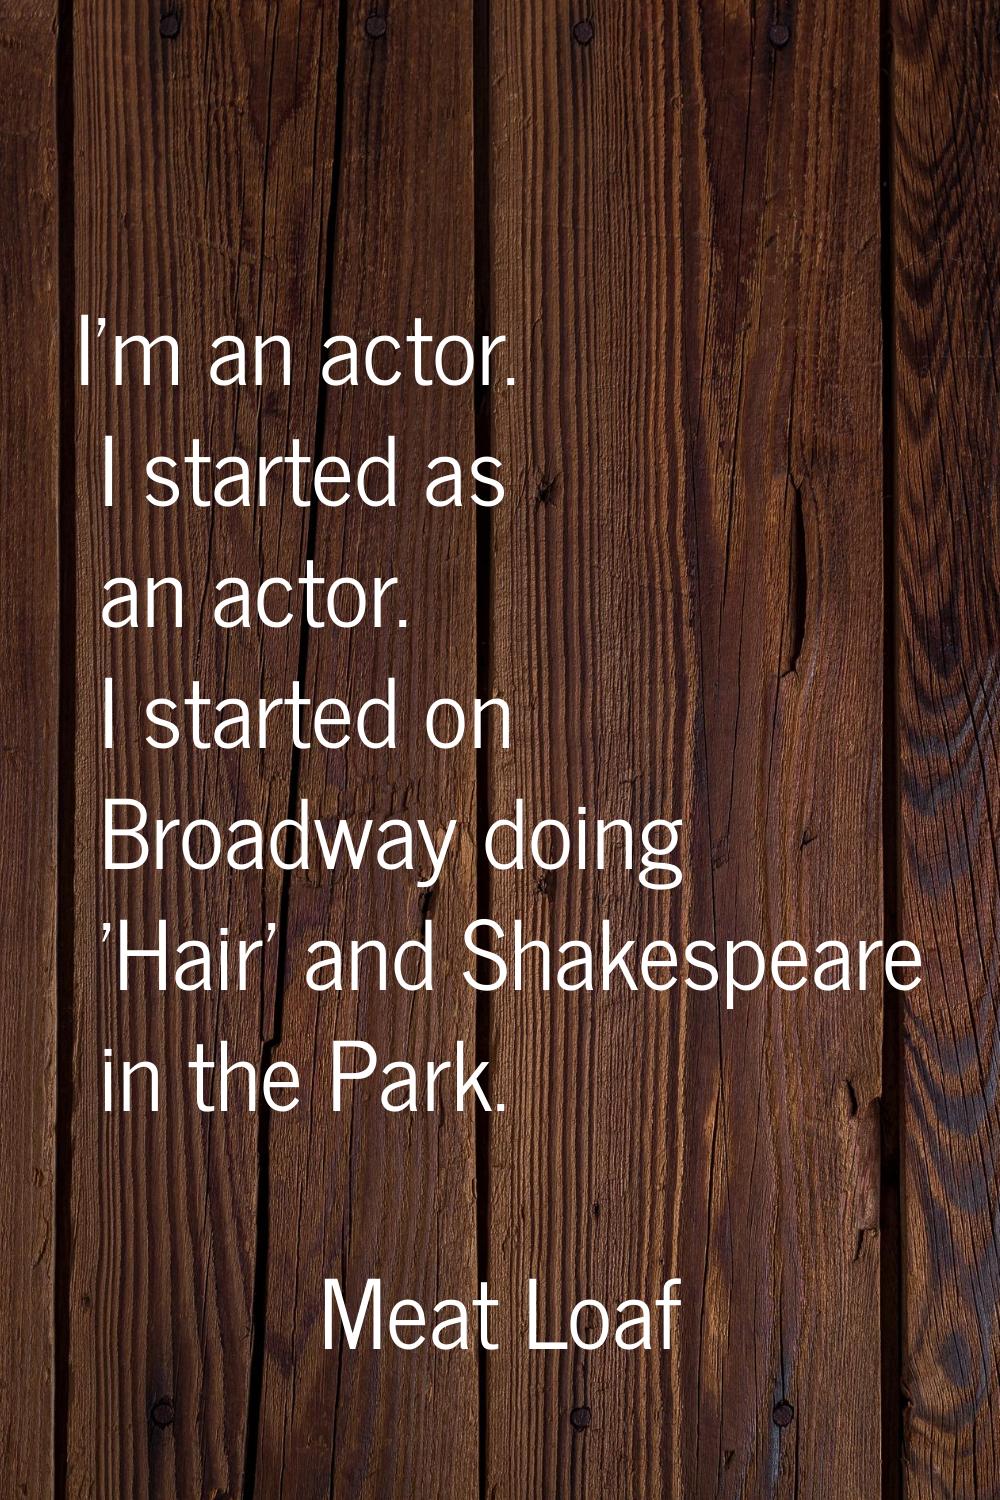 I'm an actor. I started as an actor. I started on Broadway doing 'Hair' and Shakespeare in the Park